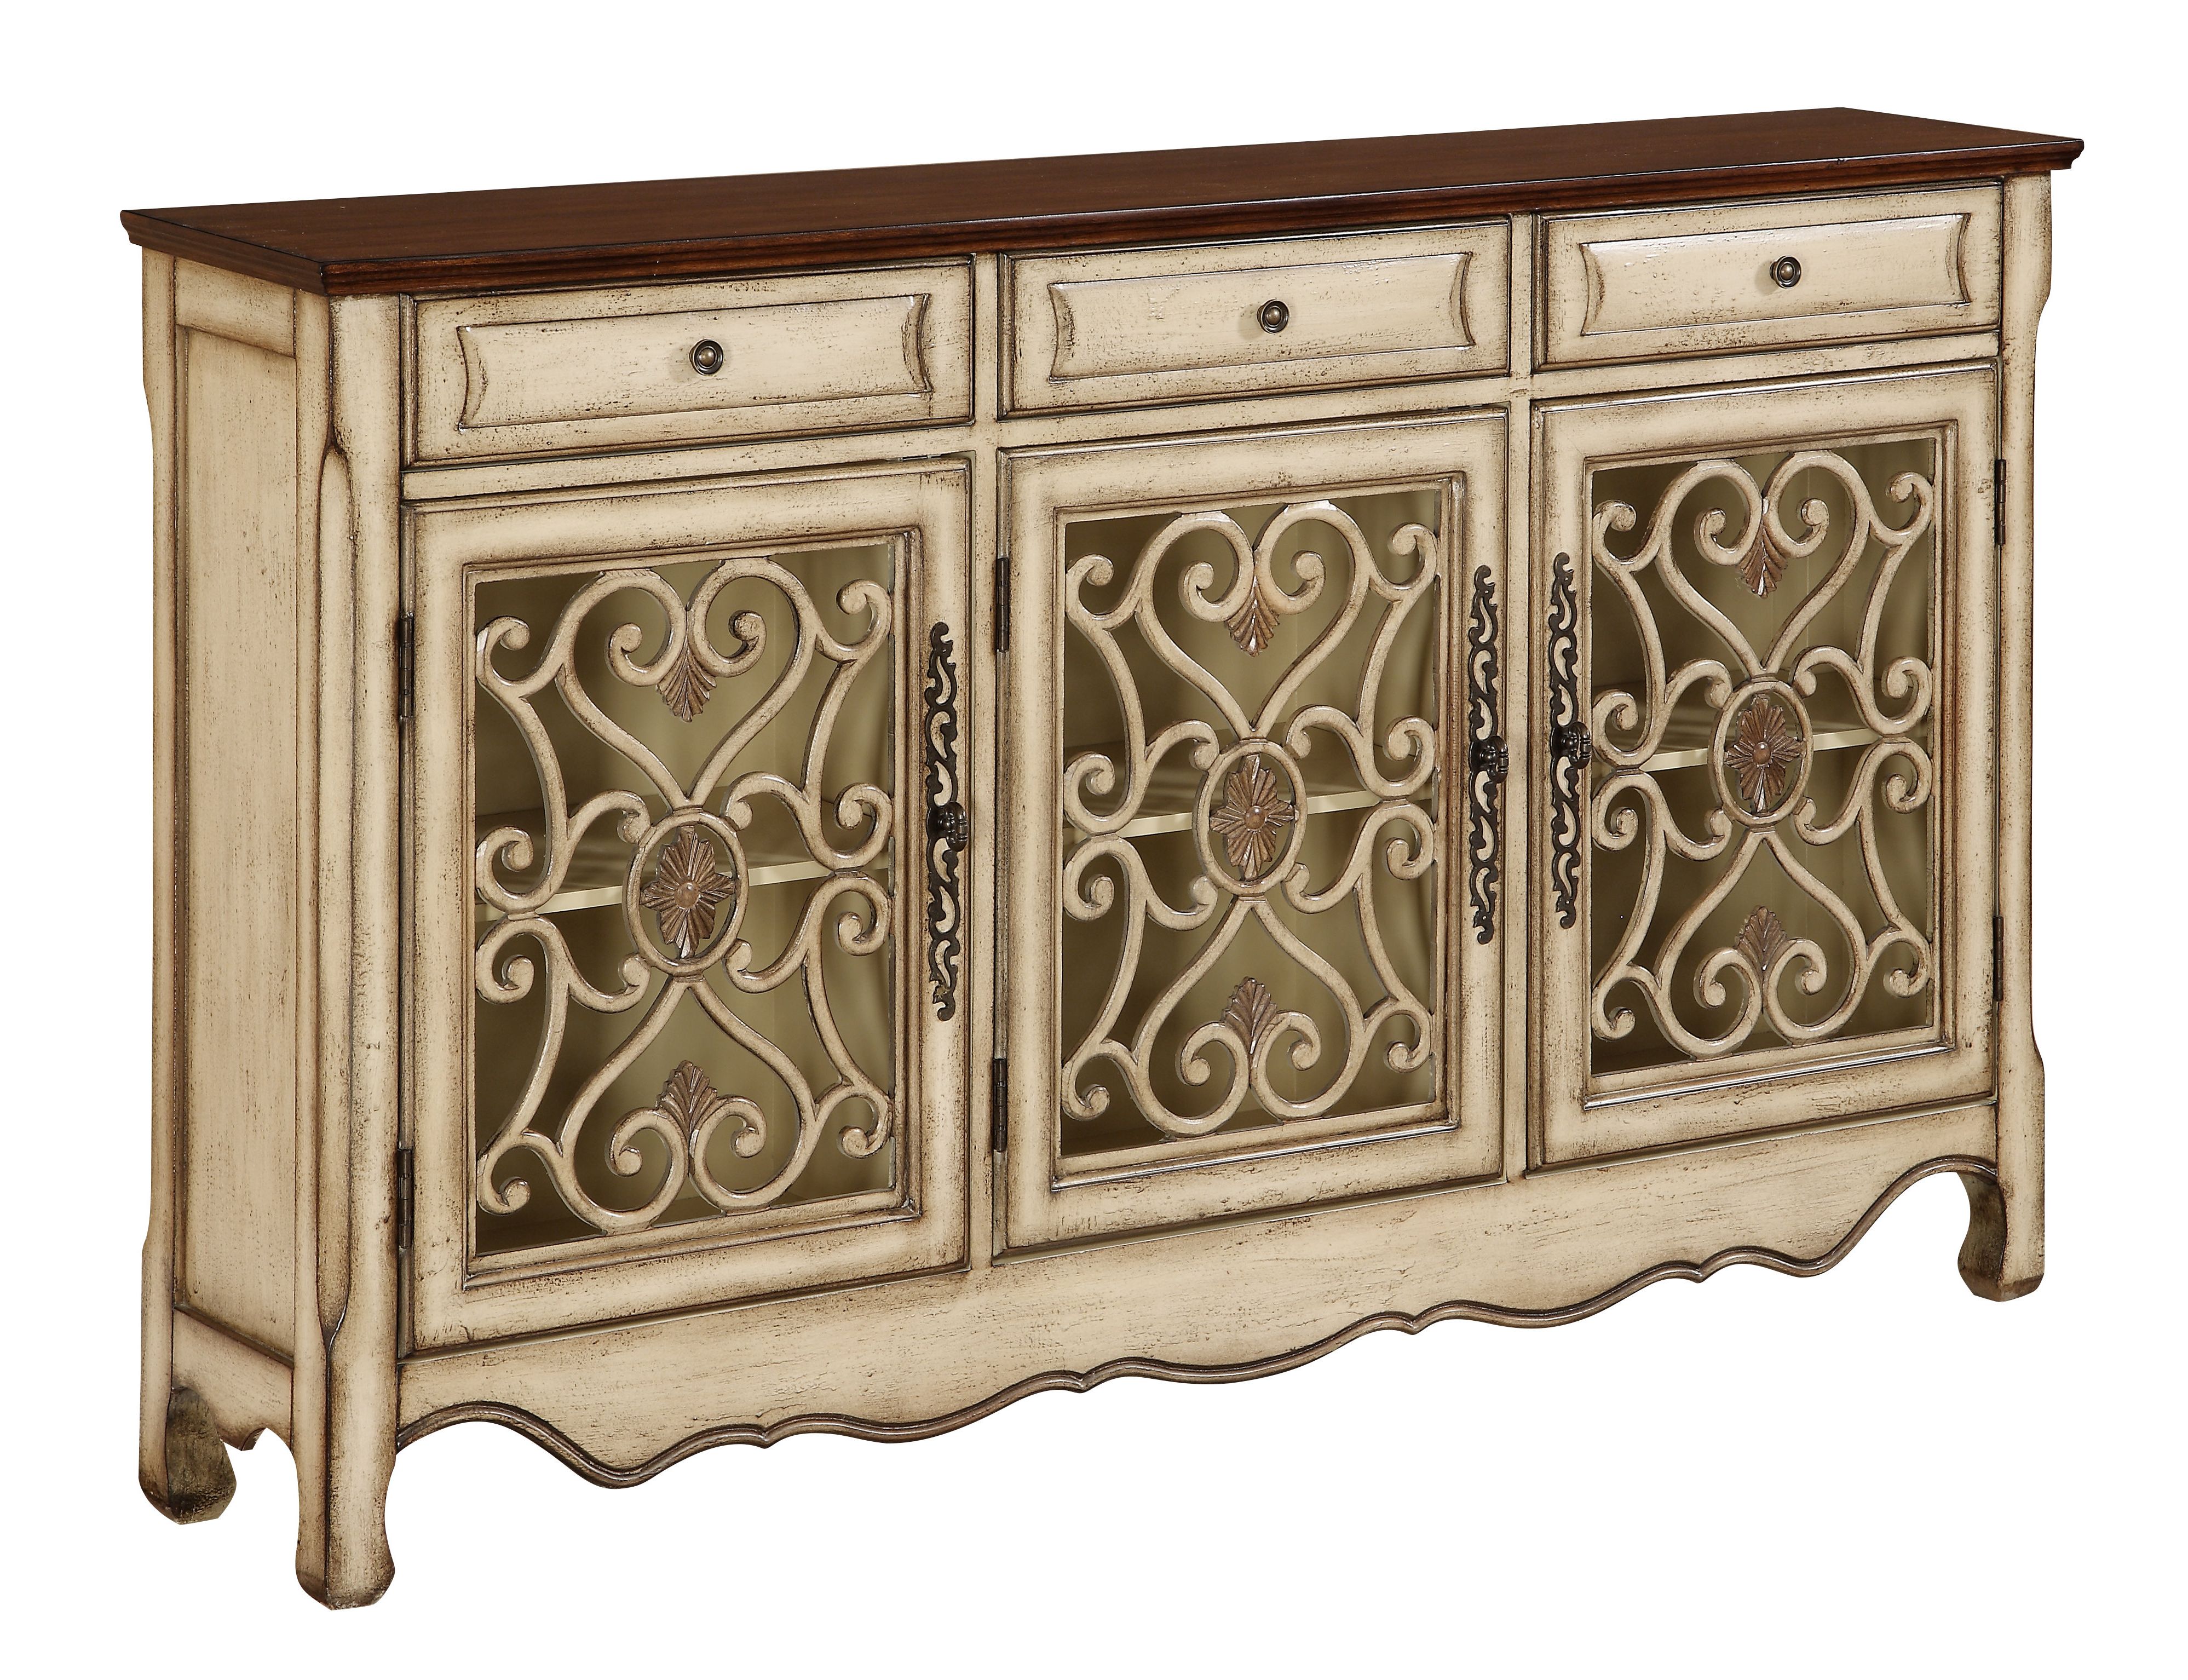 Mauzy Sideboard Pertaining To Mauzy Sideboards (Gallery 1 of 20)